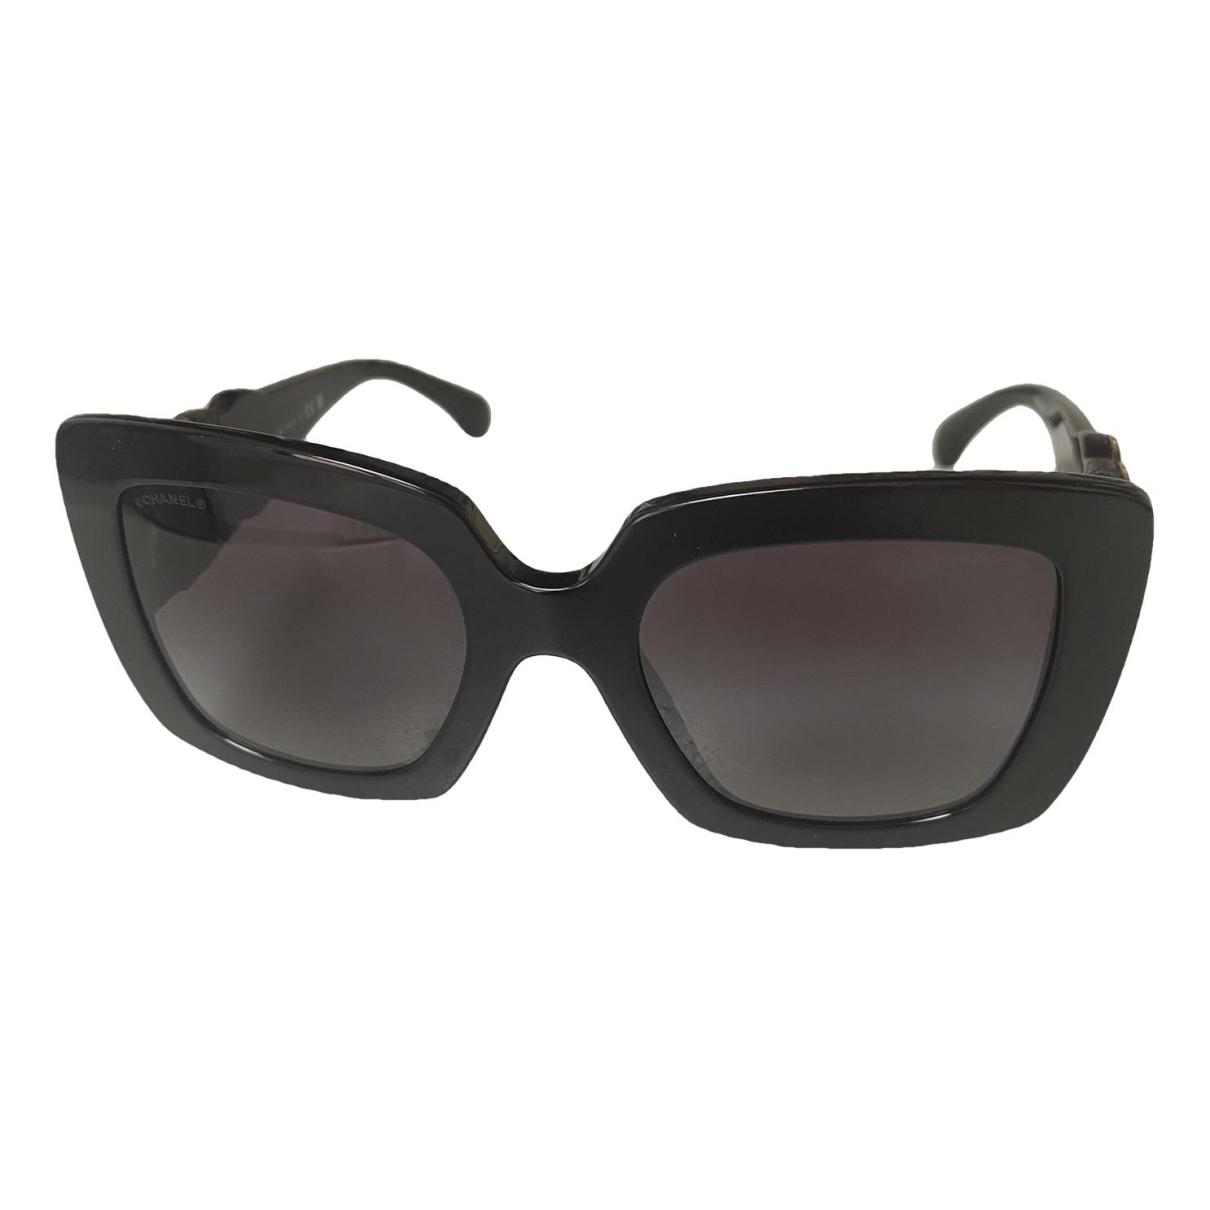 Sunglasses Chanel Black in Other - 34313869